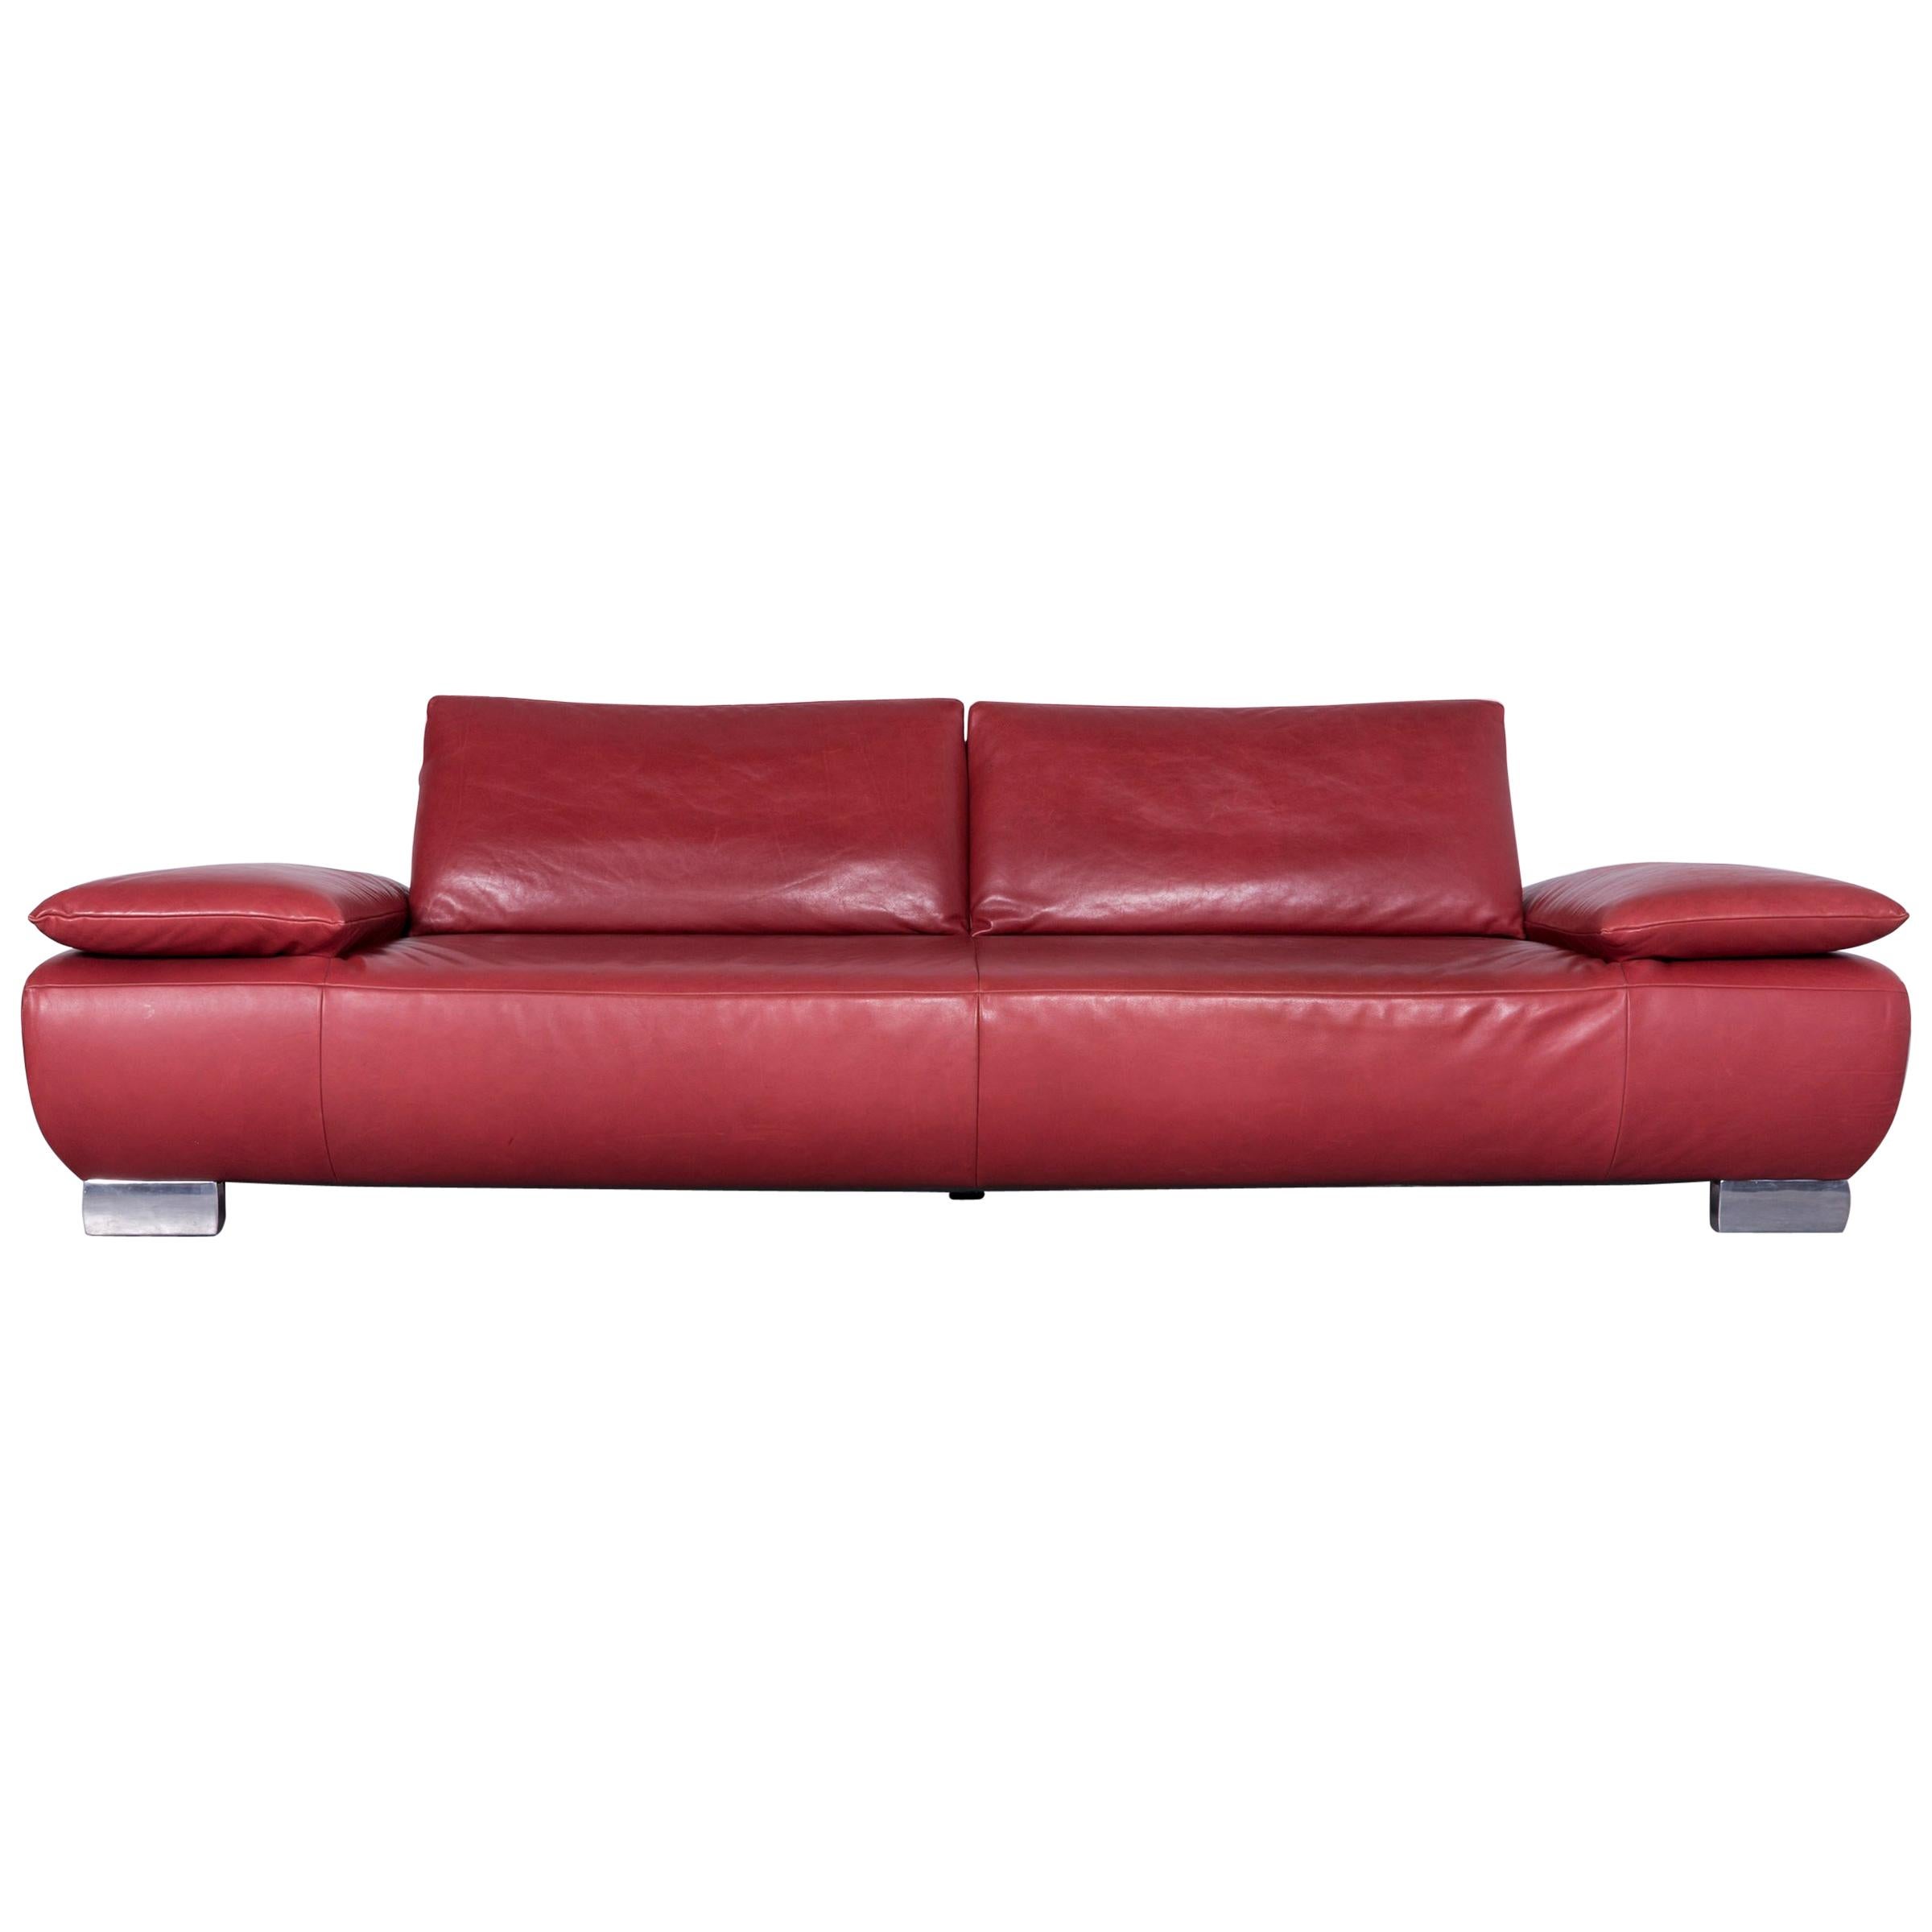 Koinor Volare Designer Sofa Red Three-Seat Leather Couch with Function For Sale